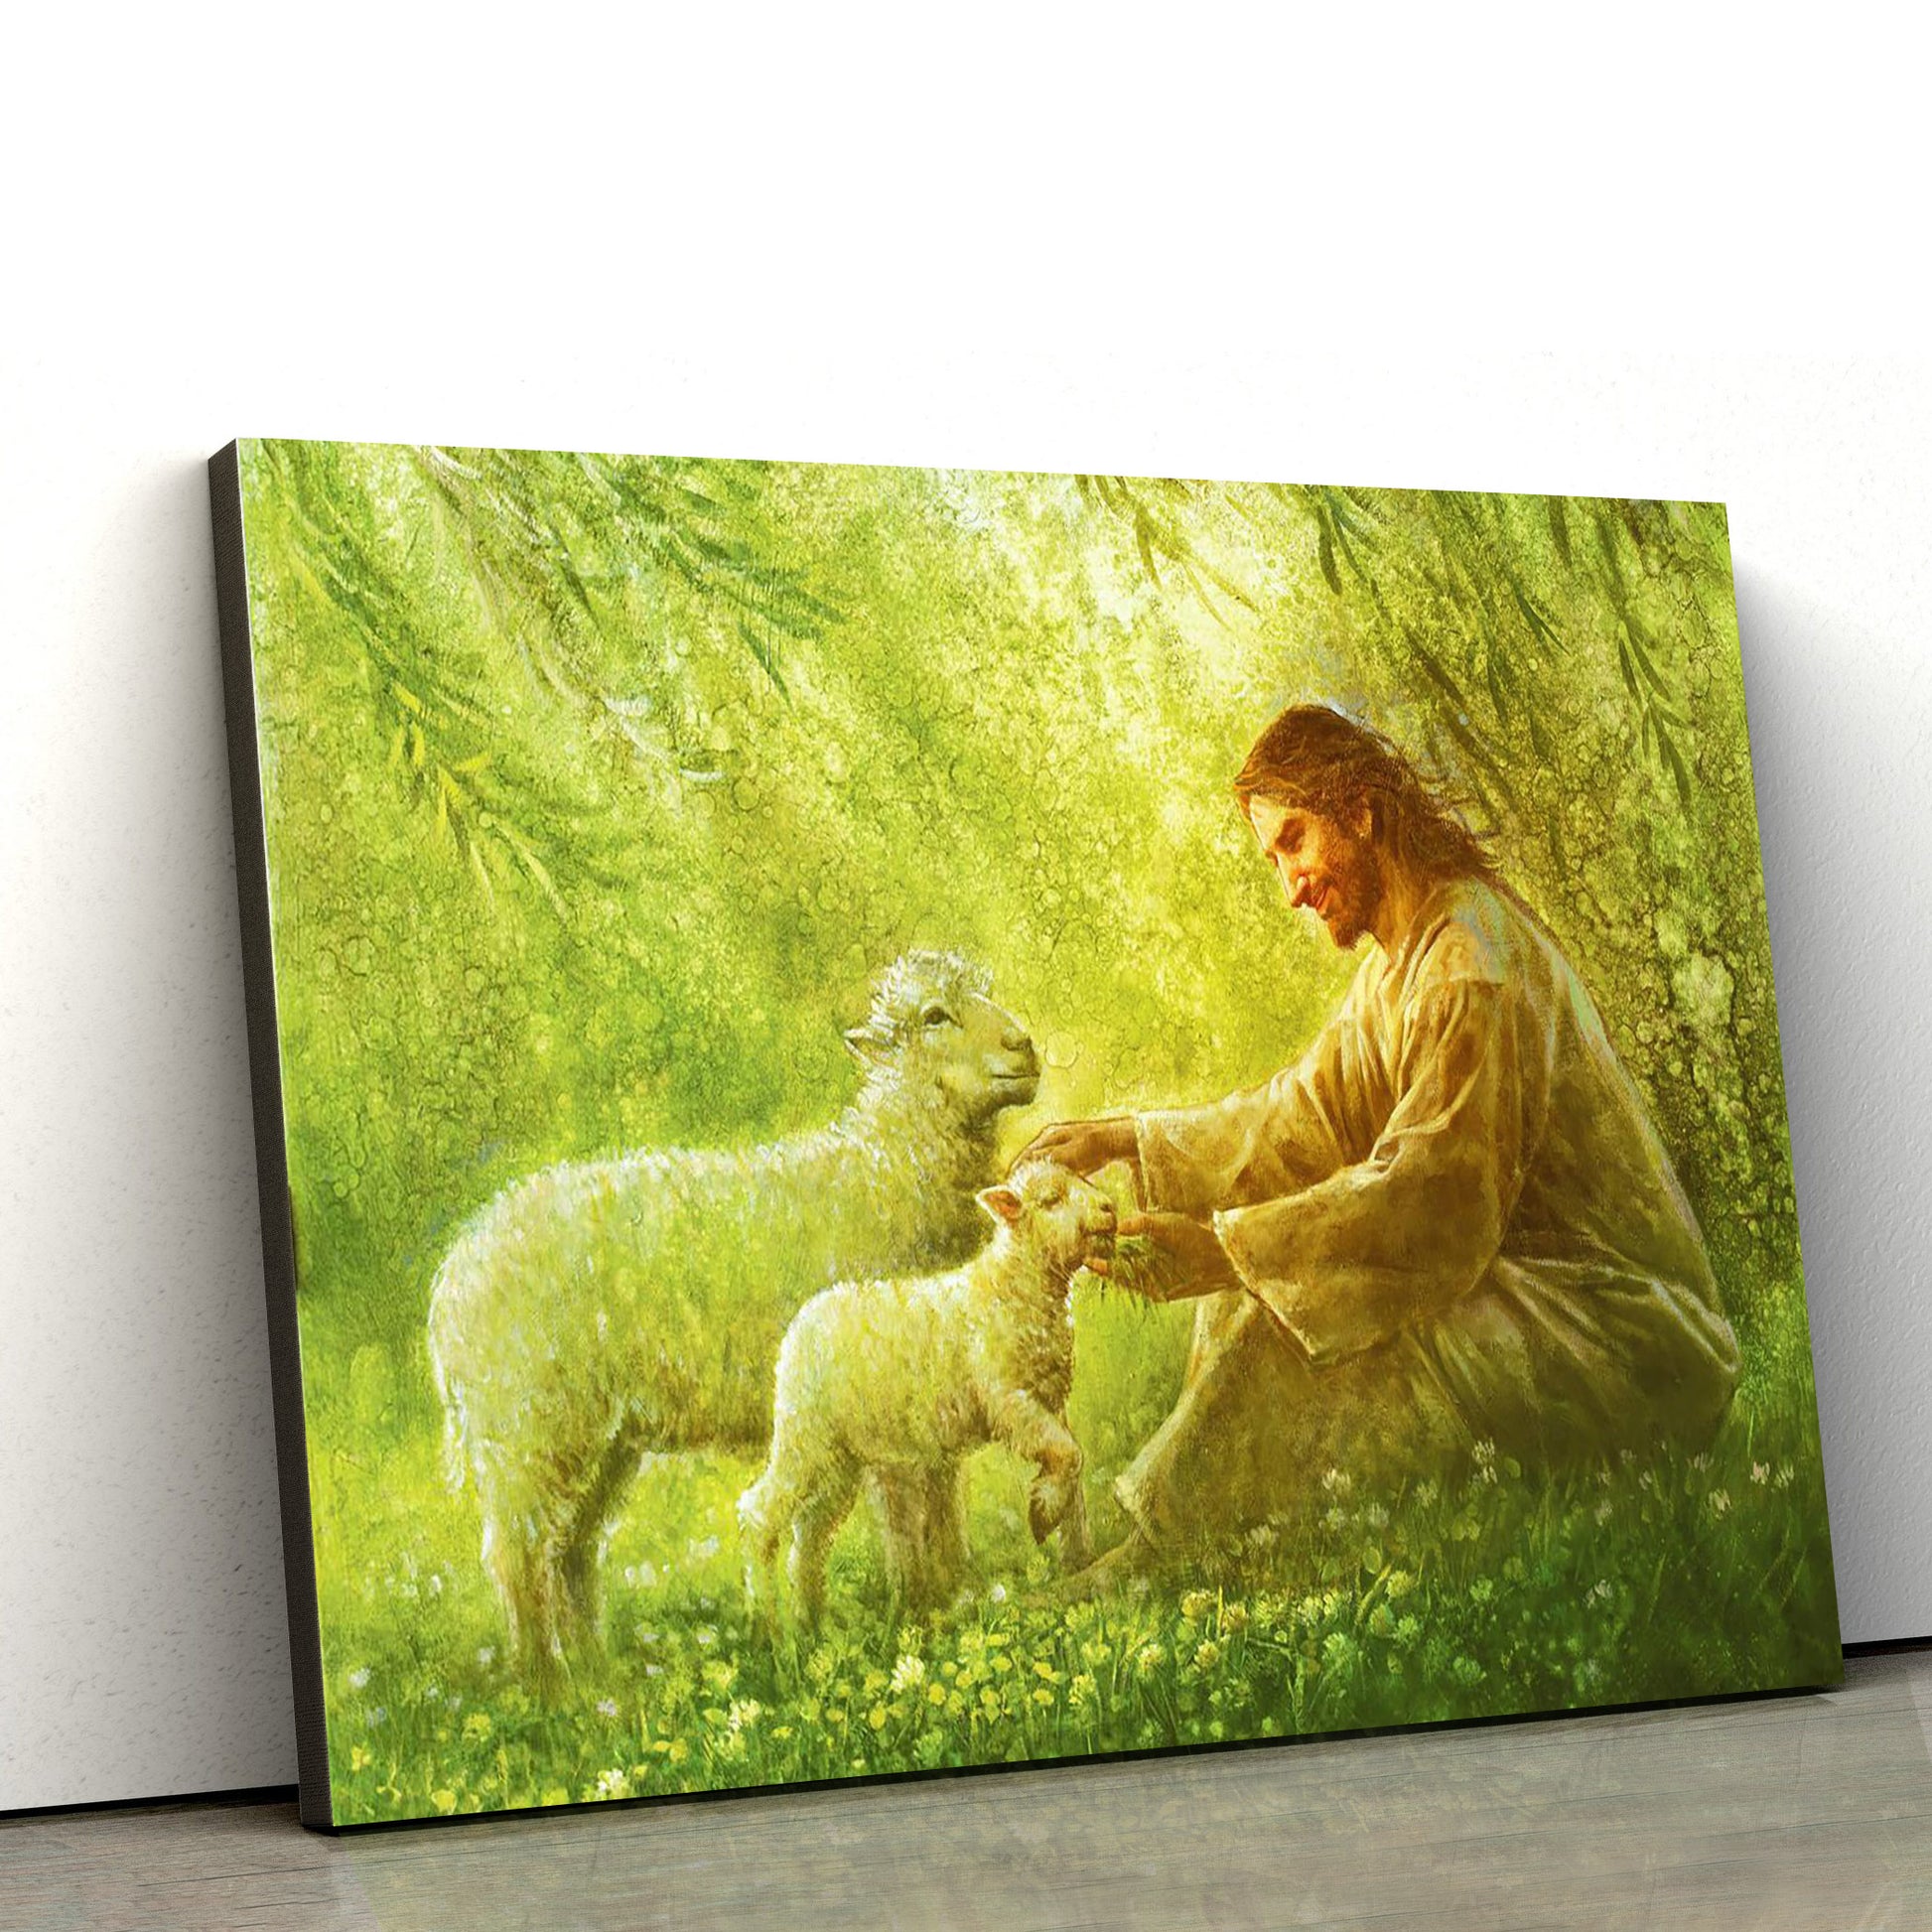 Jesus And The Lamb Picture - Green Pastures Canvas Wall Art - Christian Wall Decor